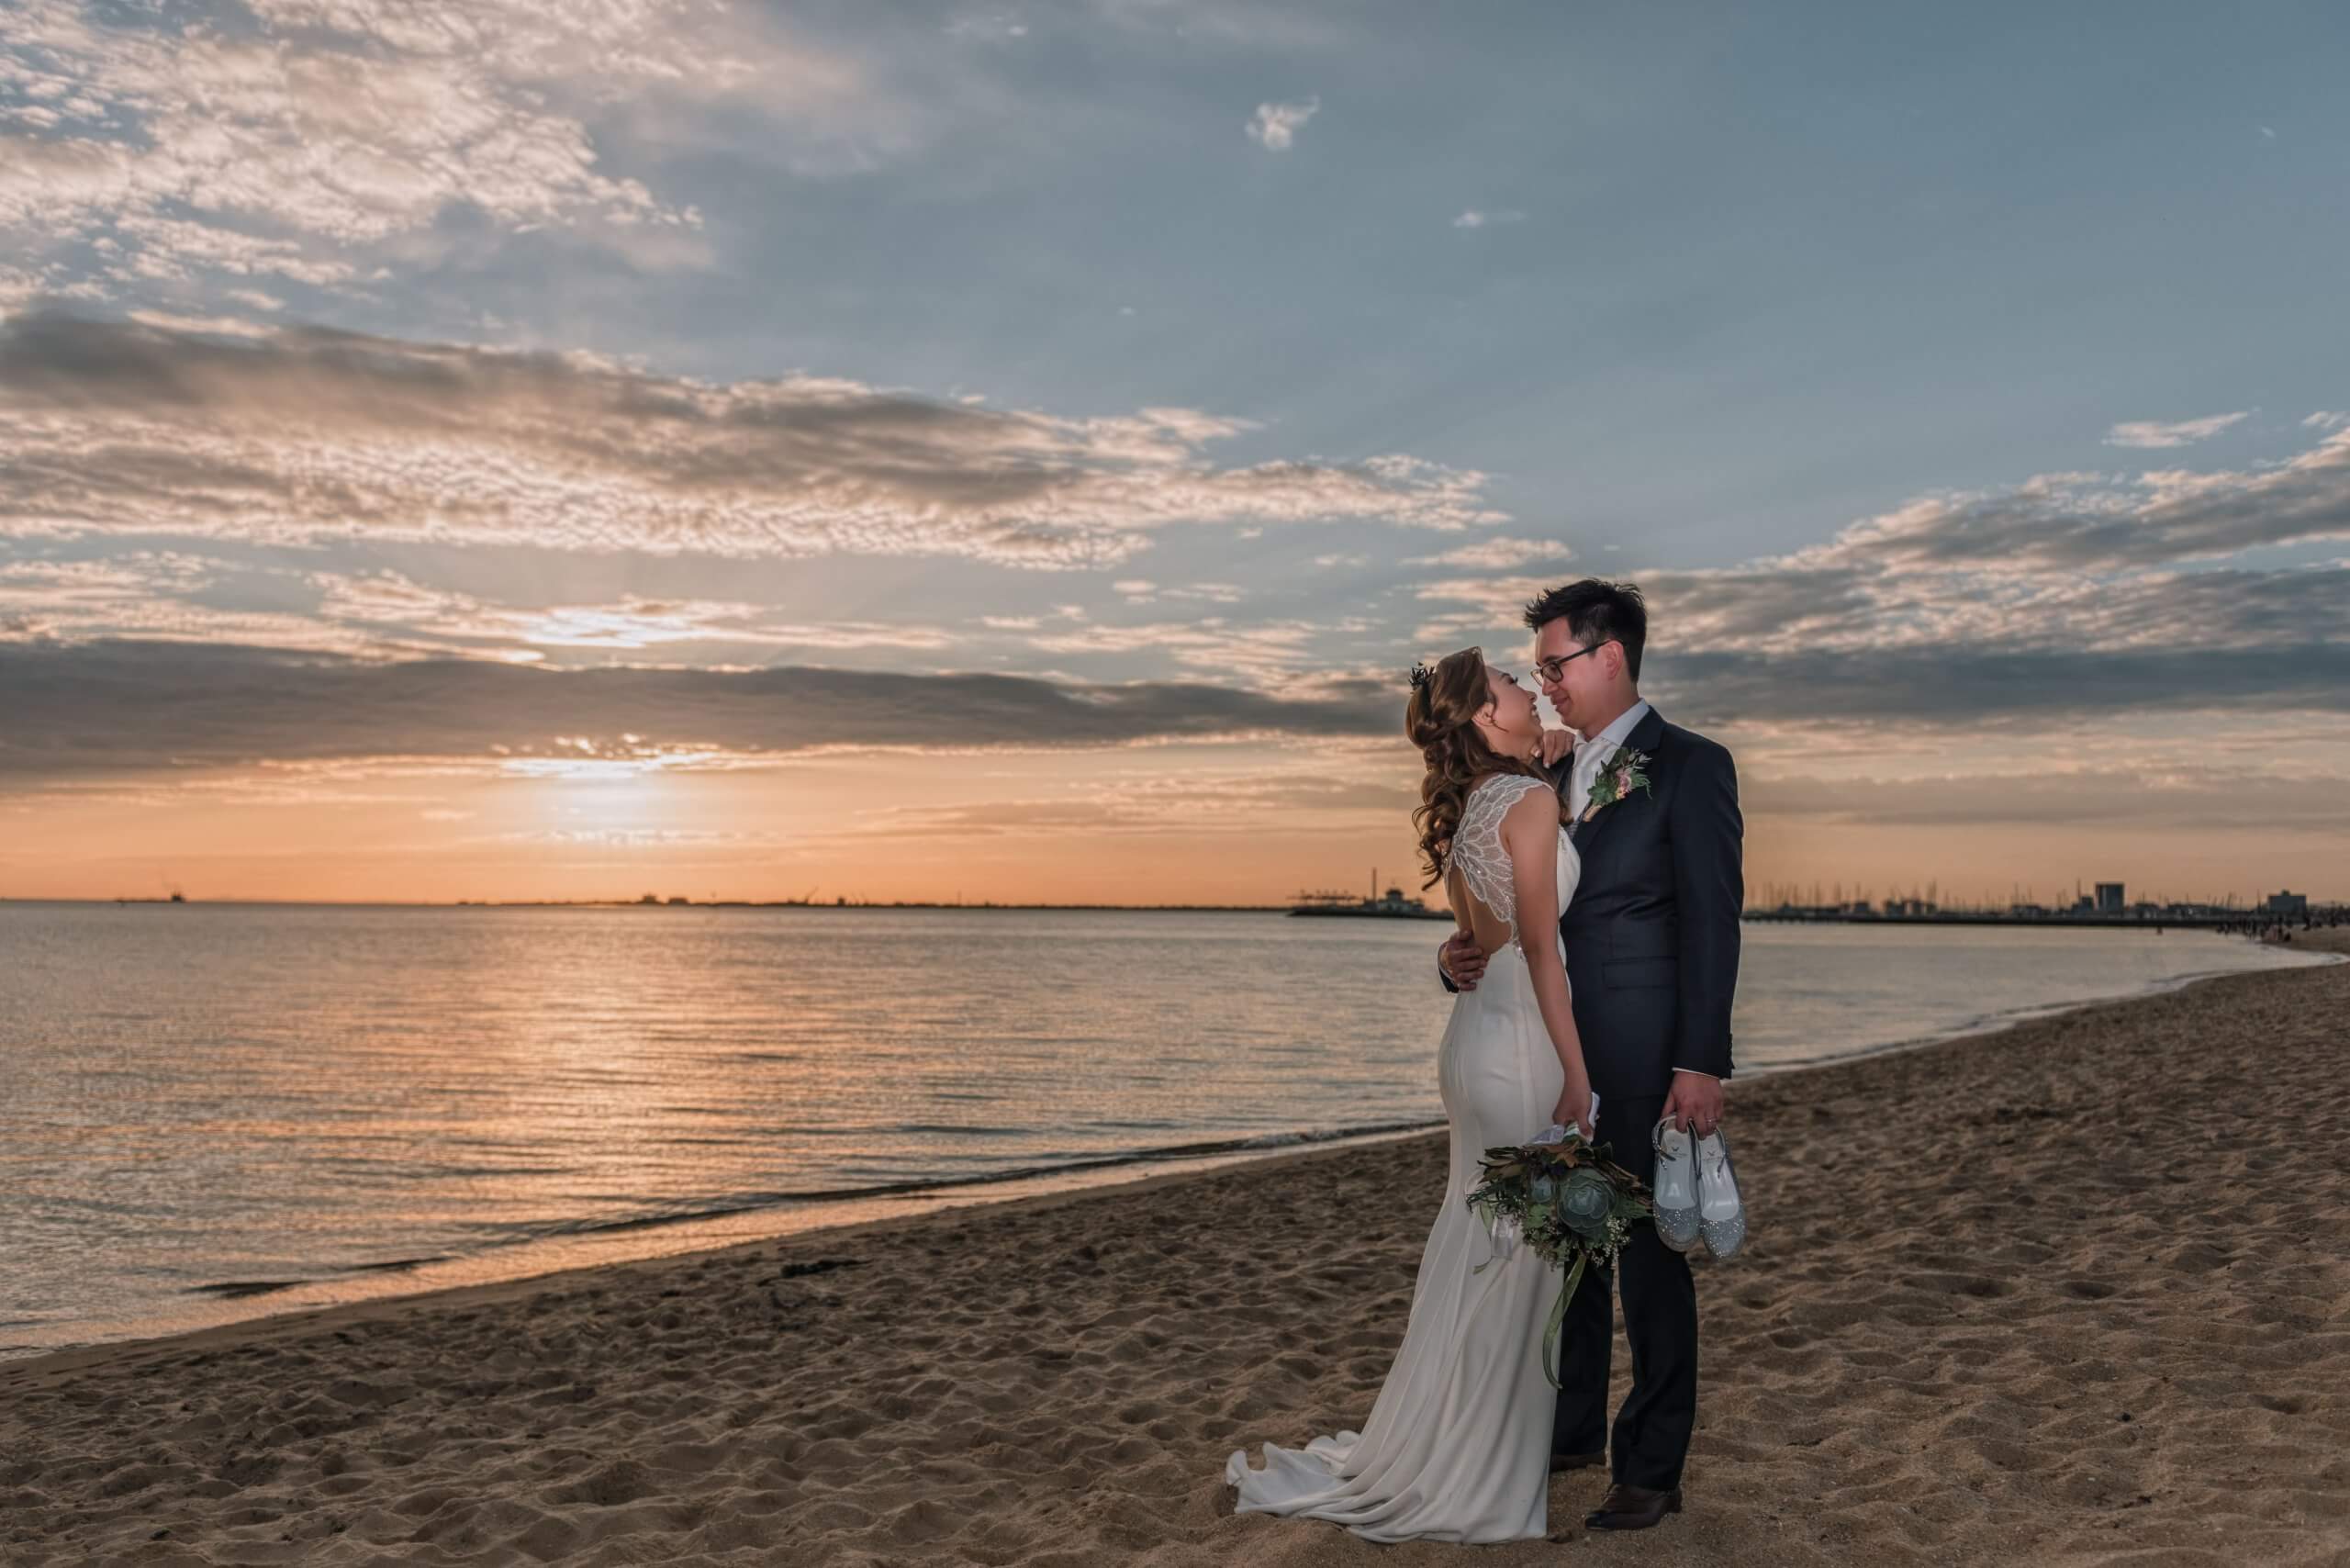 Cinematic photo of the bride and groom in the shoreline.